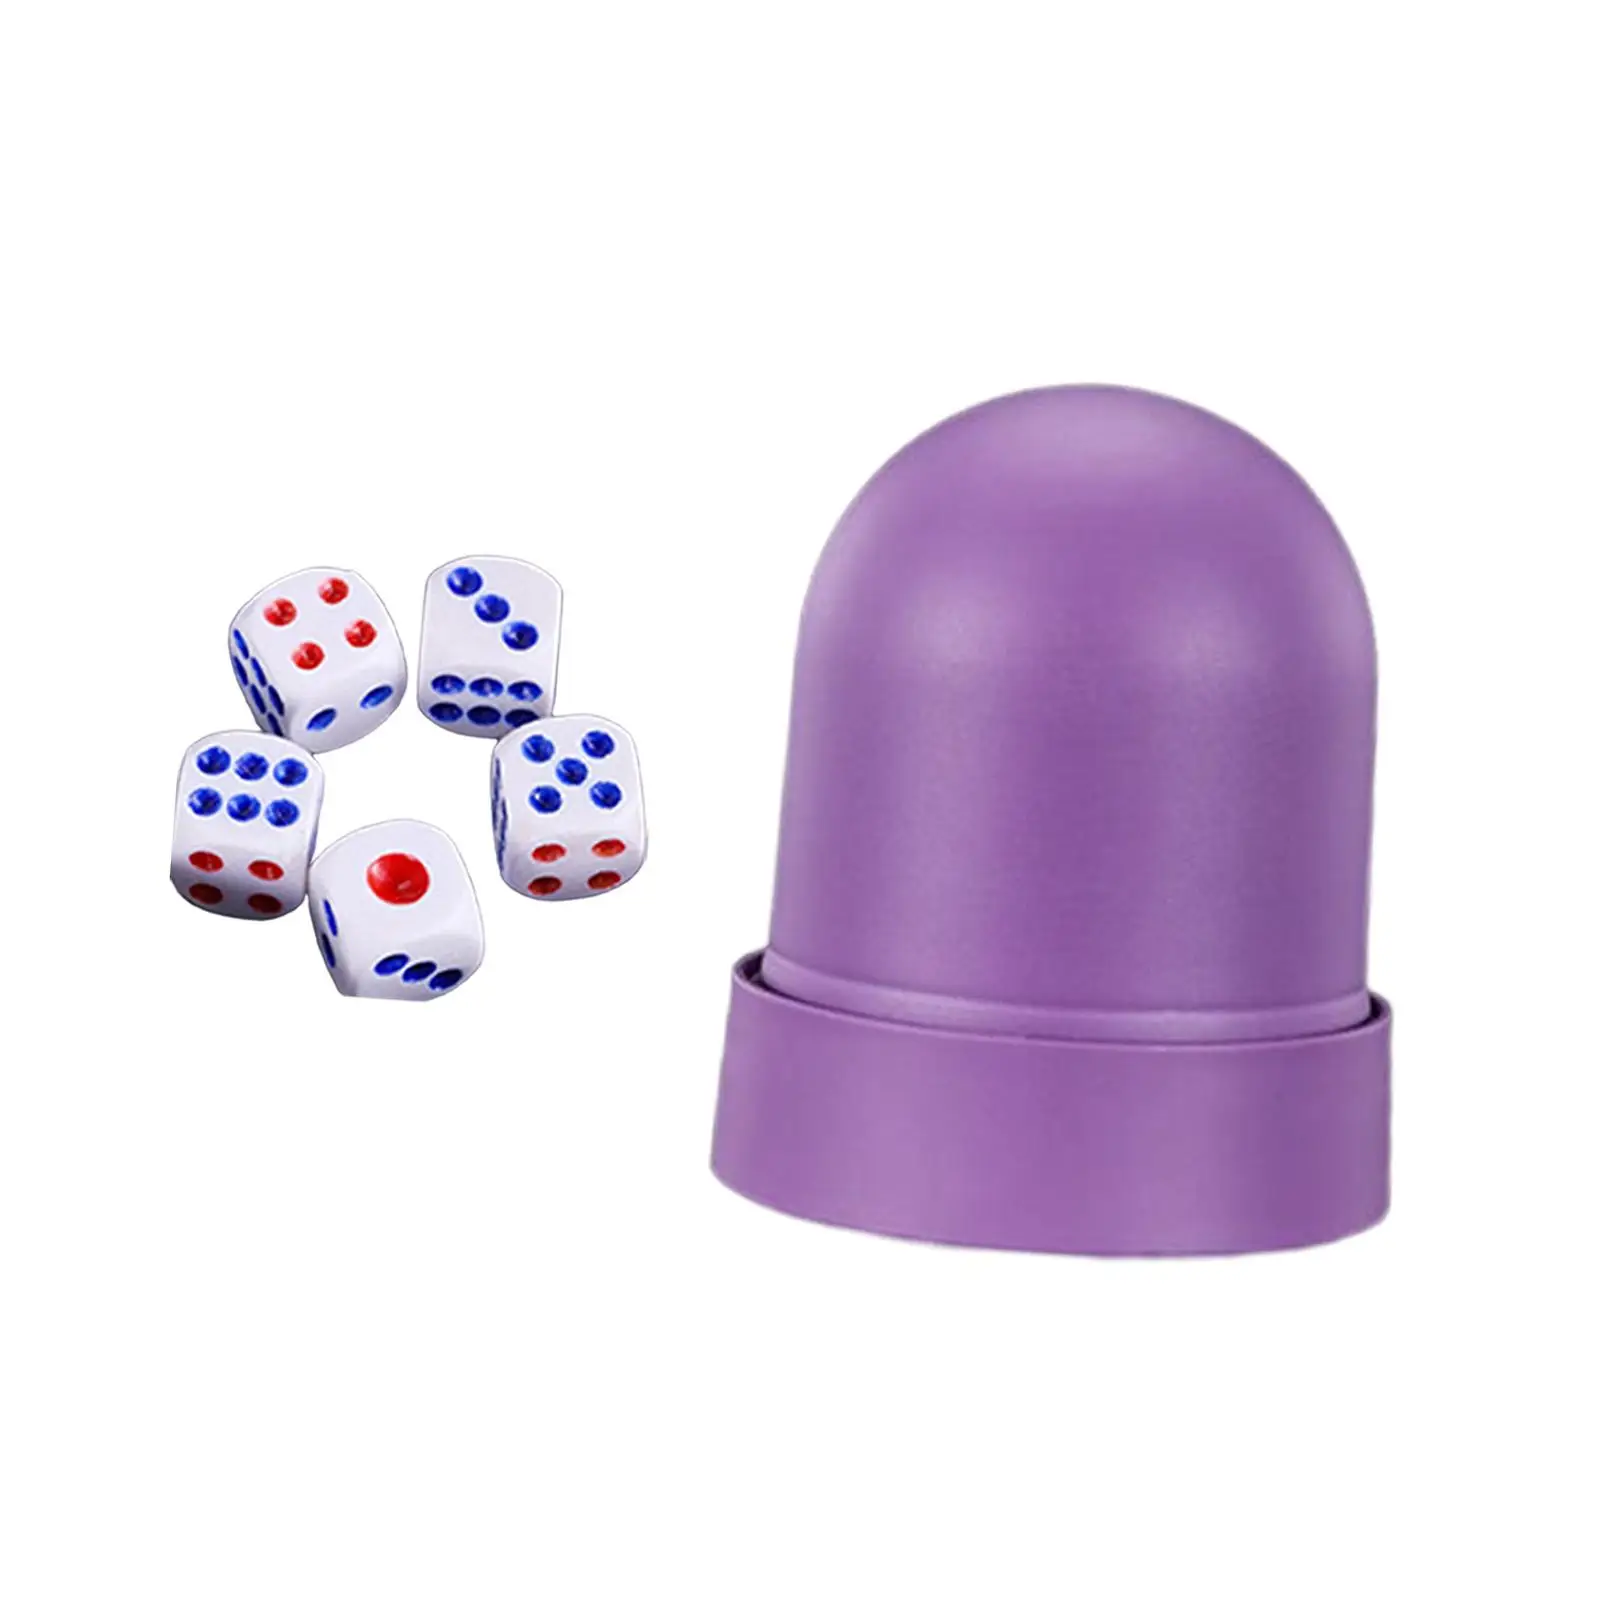 Dice Cup Upgraded Flap Dice Stacking Set with Cup Comfortable for Friends Travel